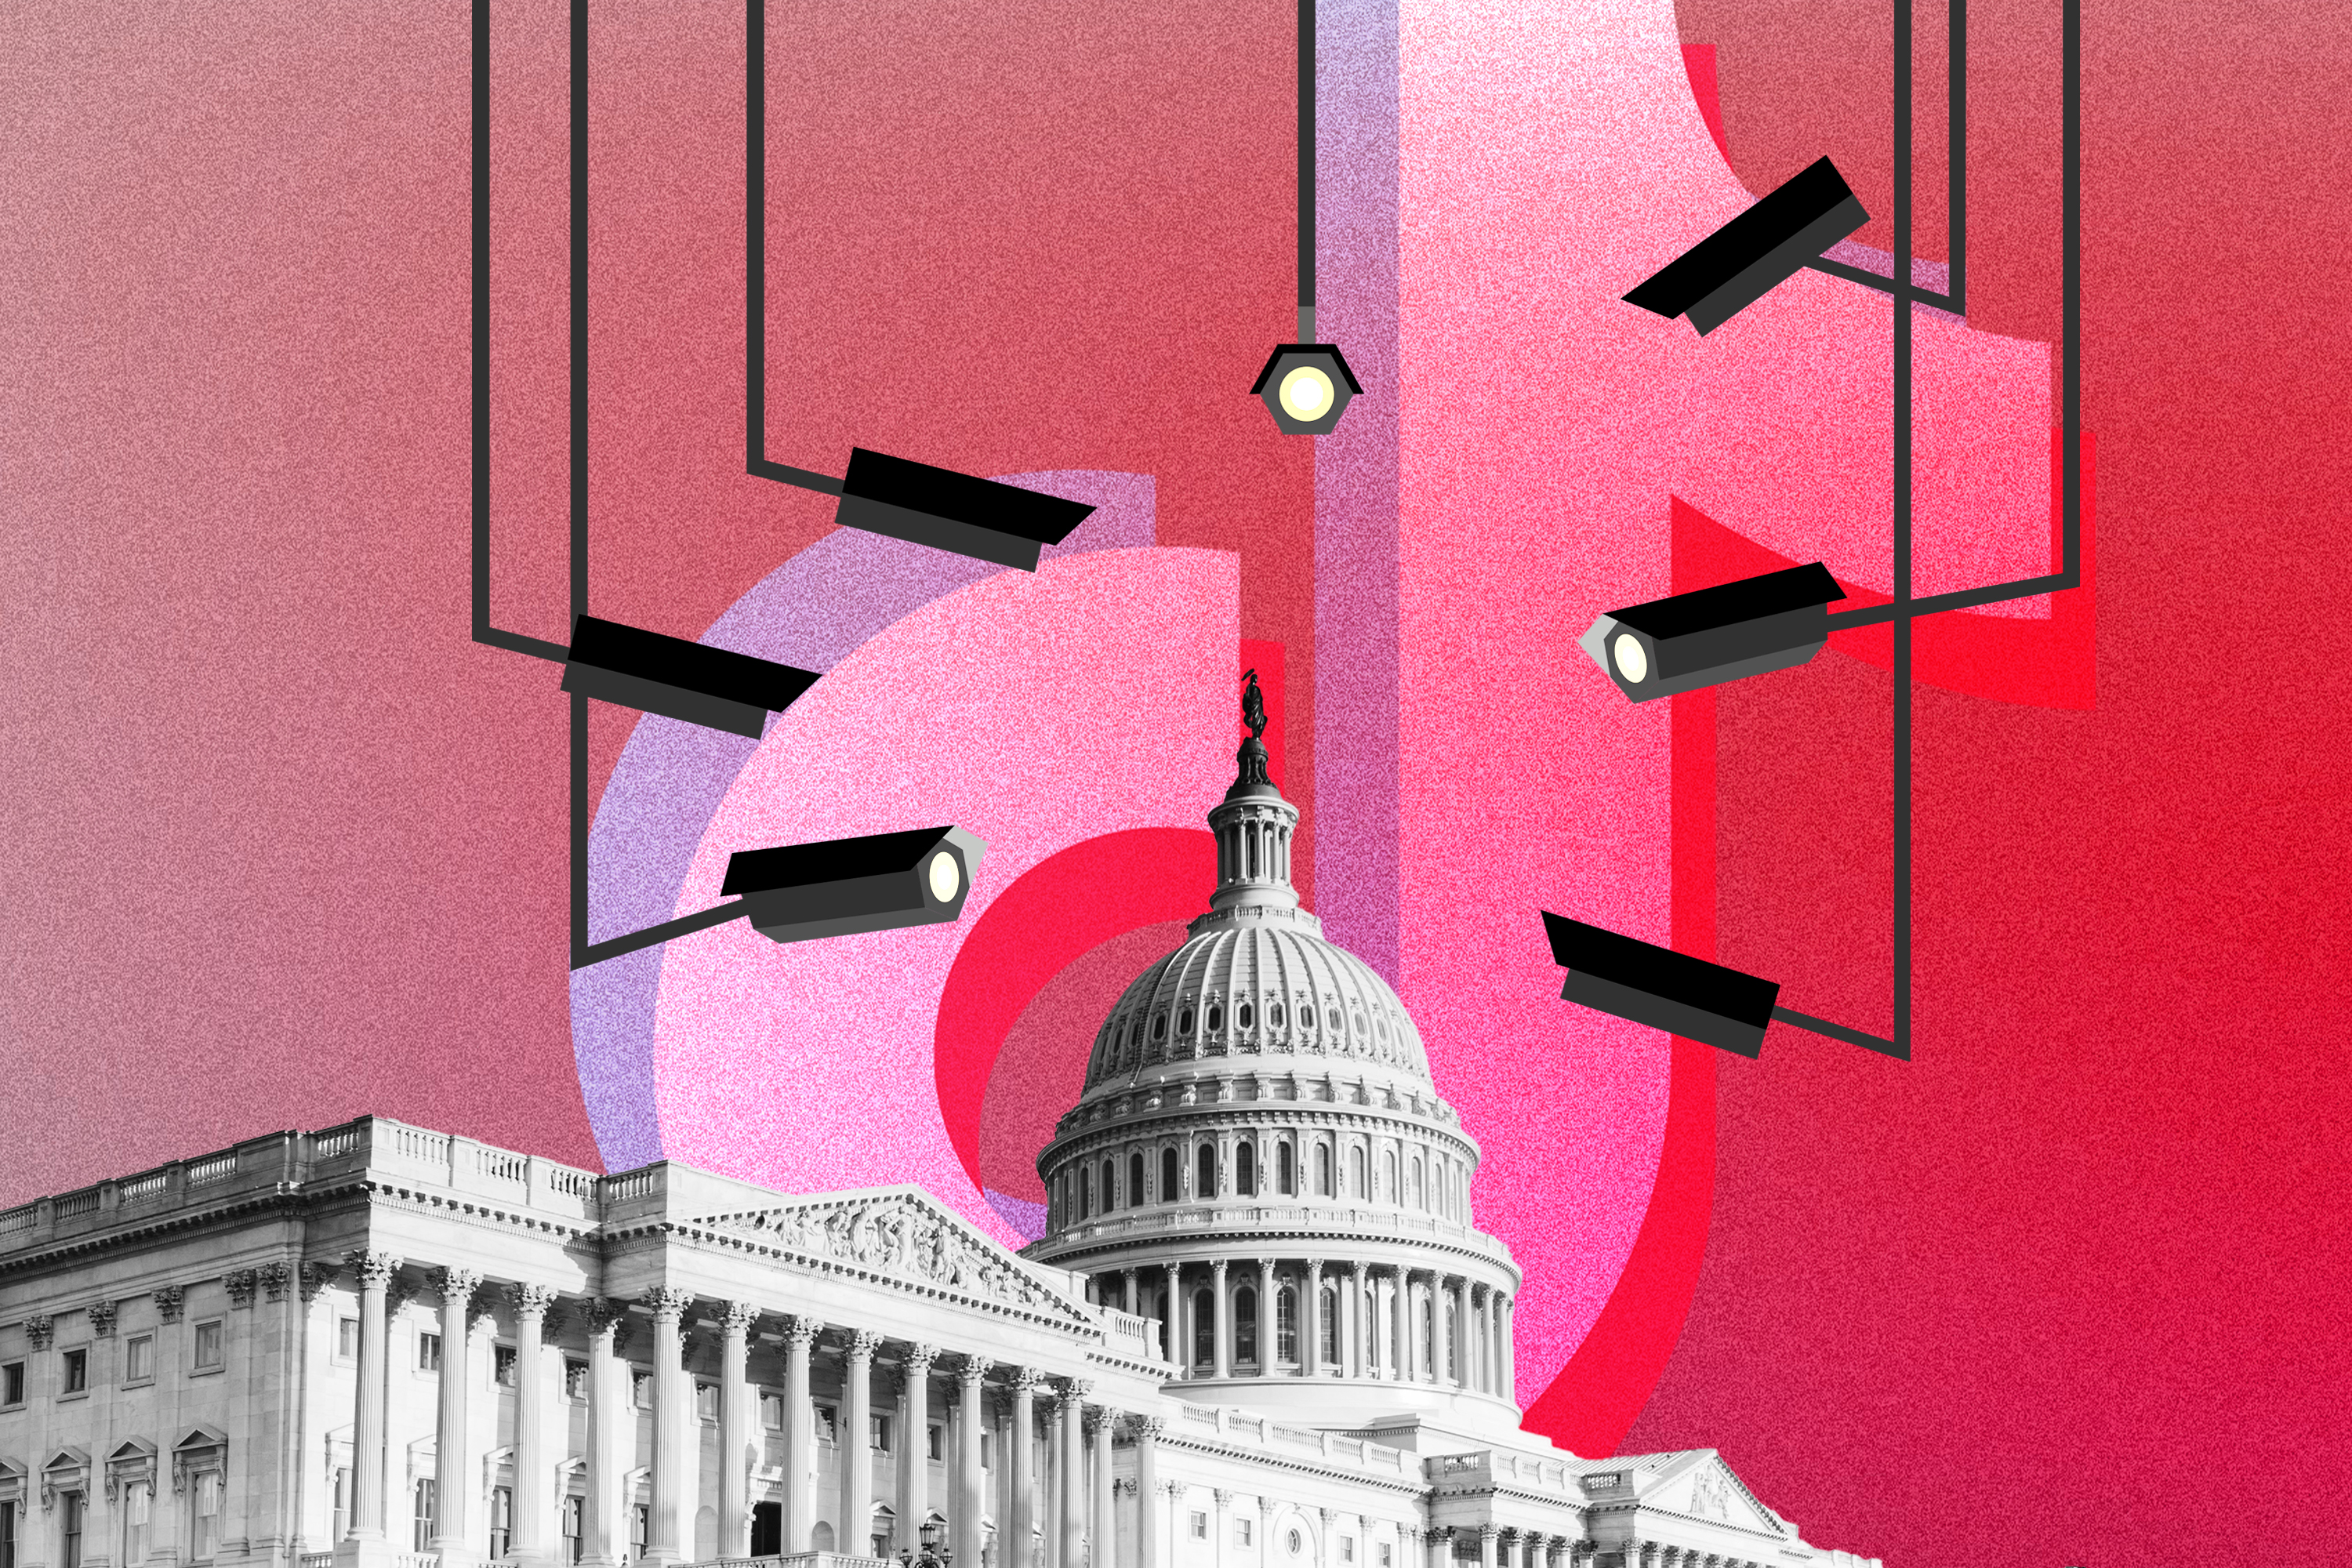 An illustration of the US Senate building surrounded by spy cameras and with the TikTok logo superimposed on it.